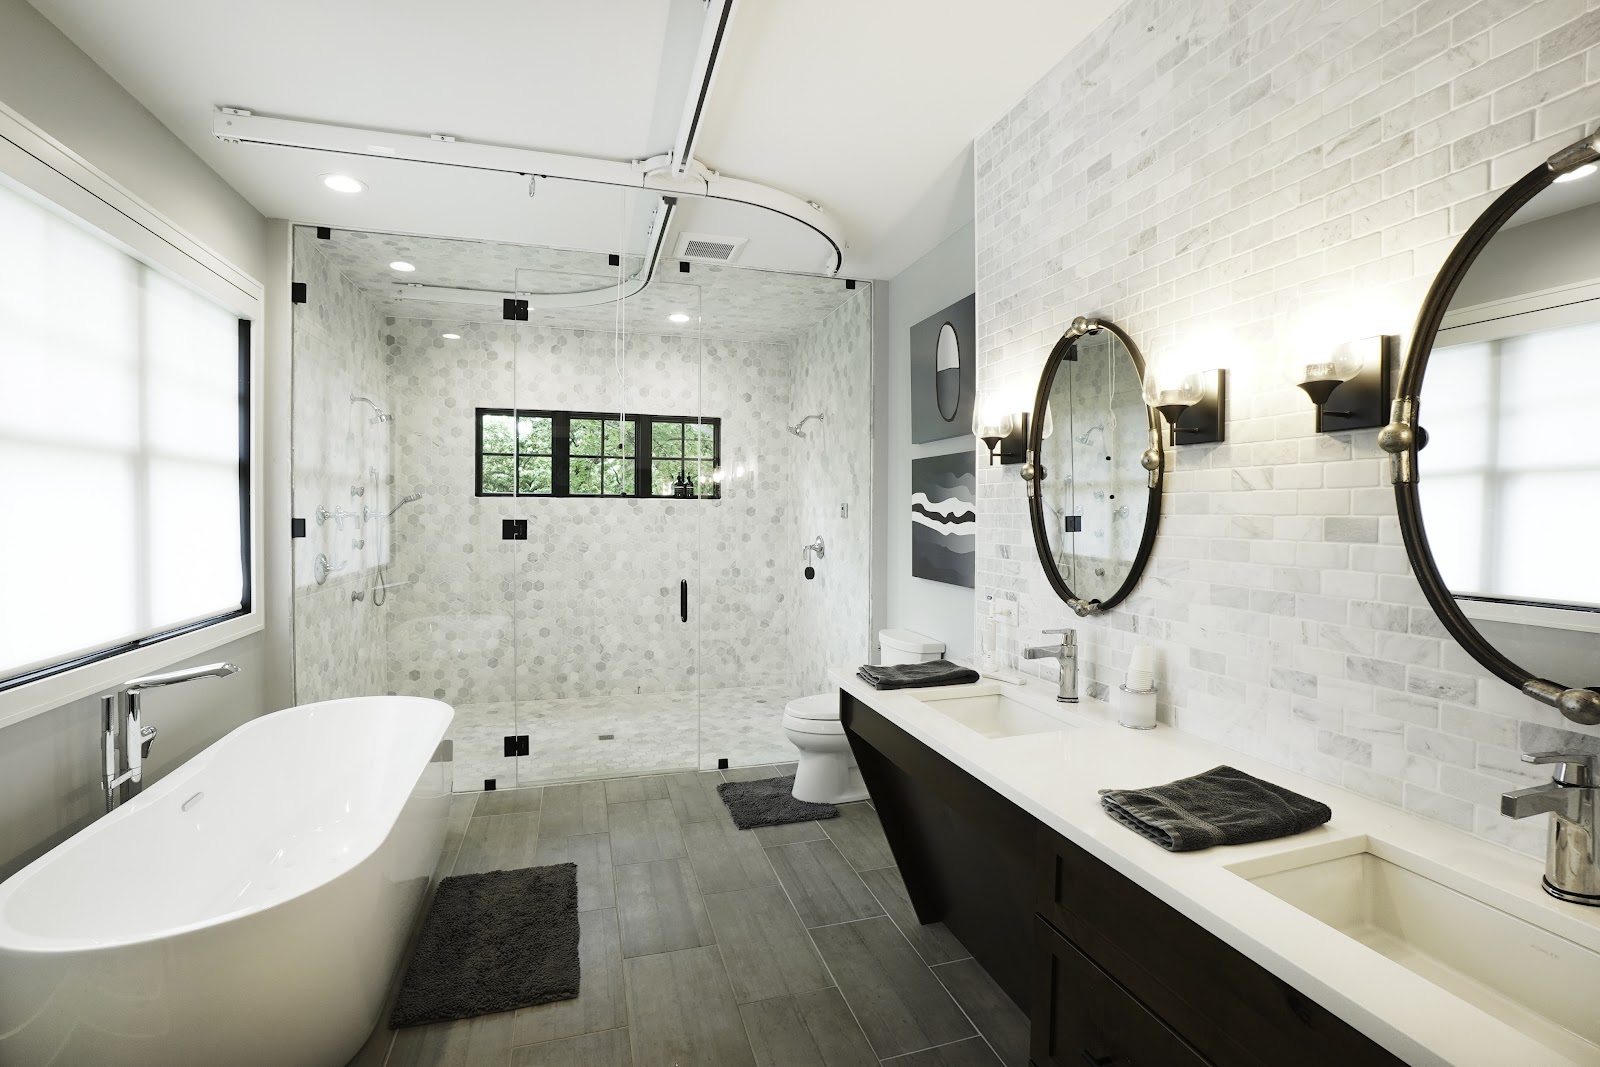 Barrier-free-bath-with-carrara-marble-tile-walls-and-large-barrier-free-shower-featuring-a-large-soaker-tube-walnut-vanity-with-quartz-countertops-and-ceiling-lift